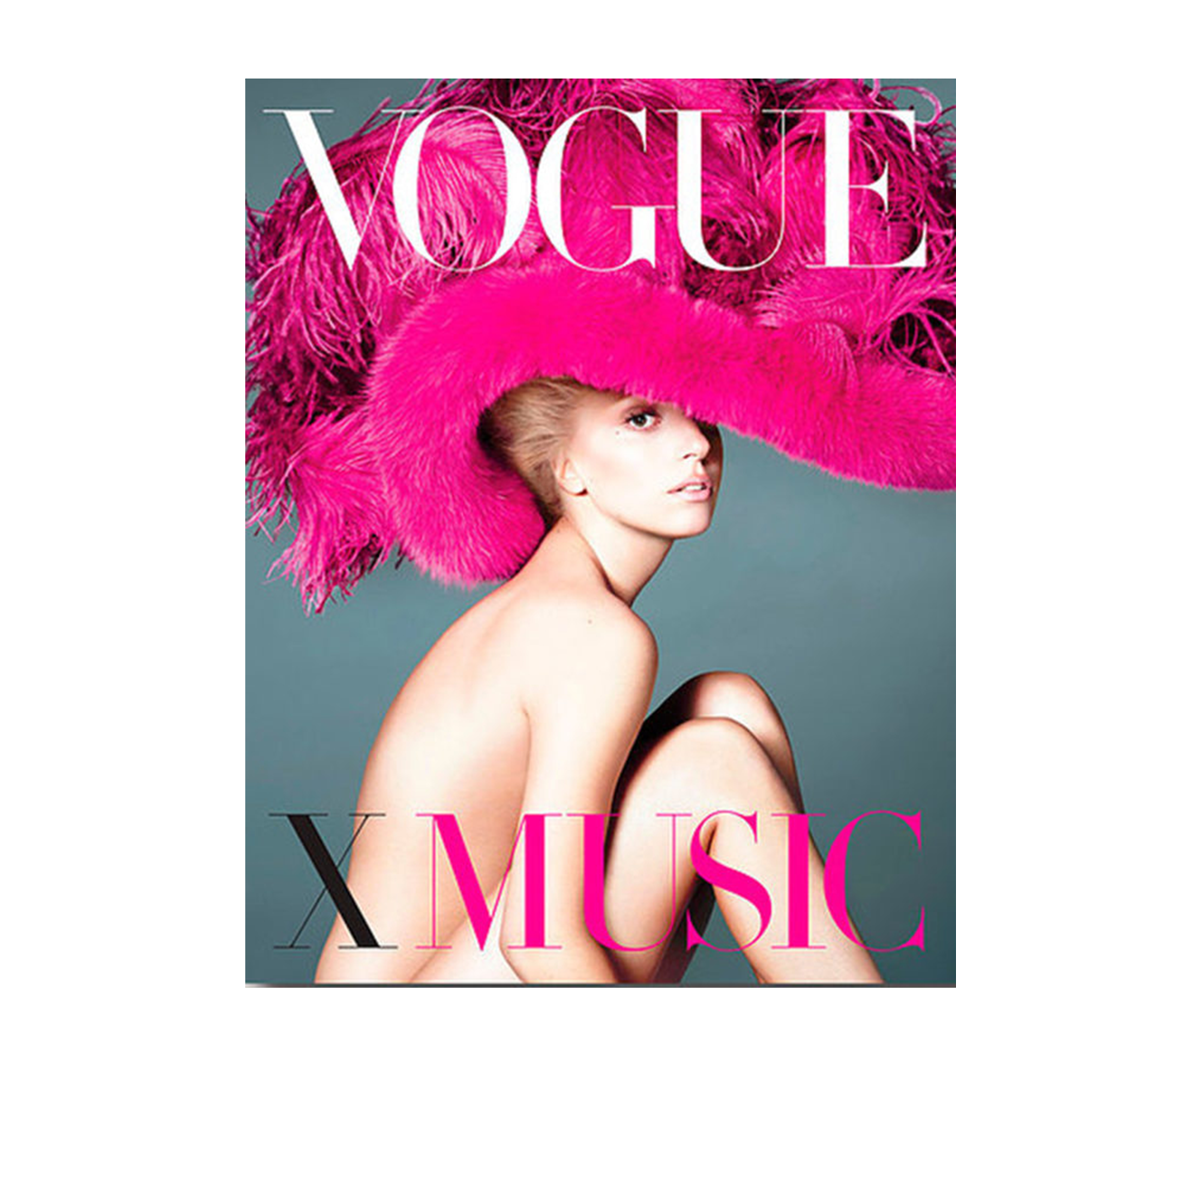 Vogue X Music Coffee Table Book